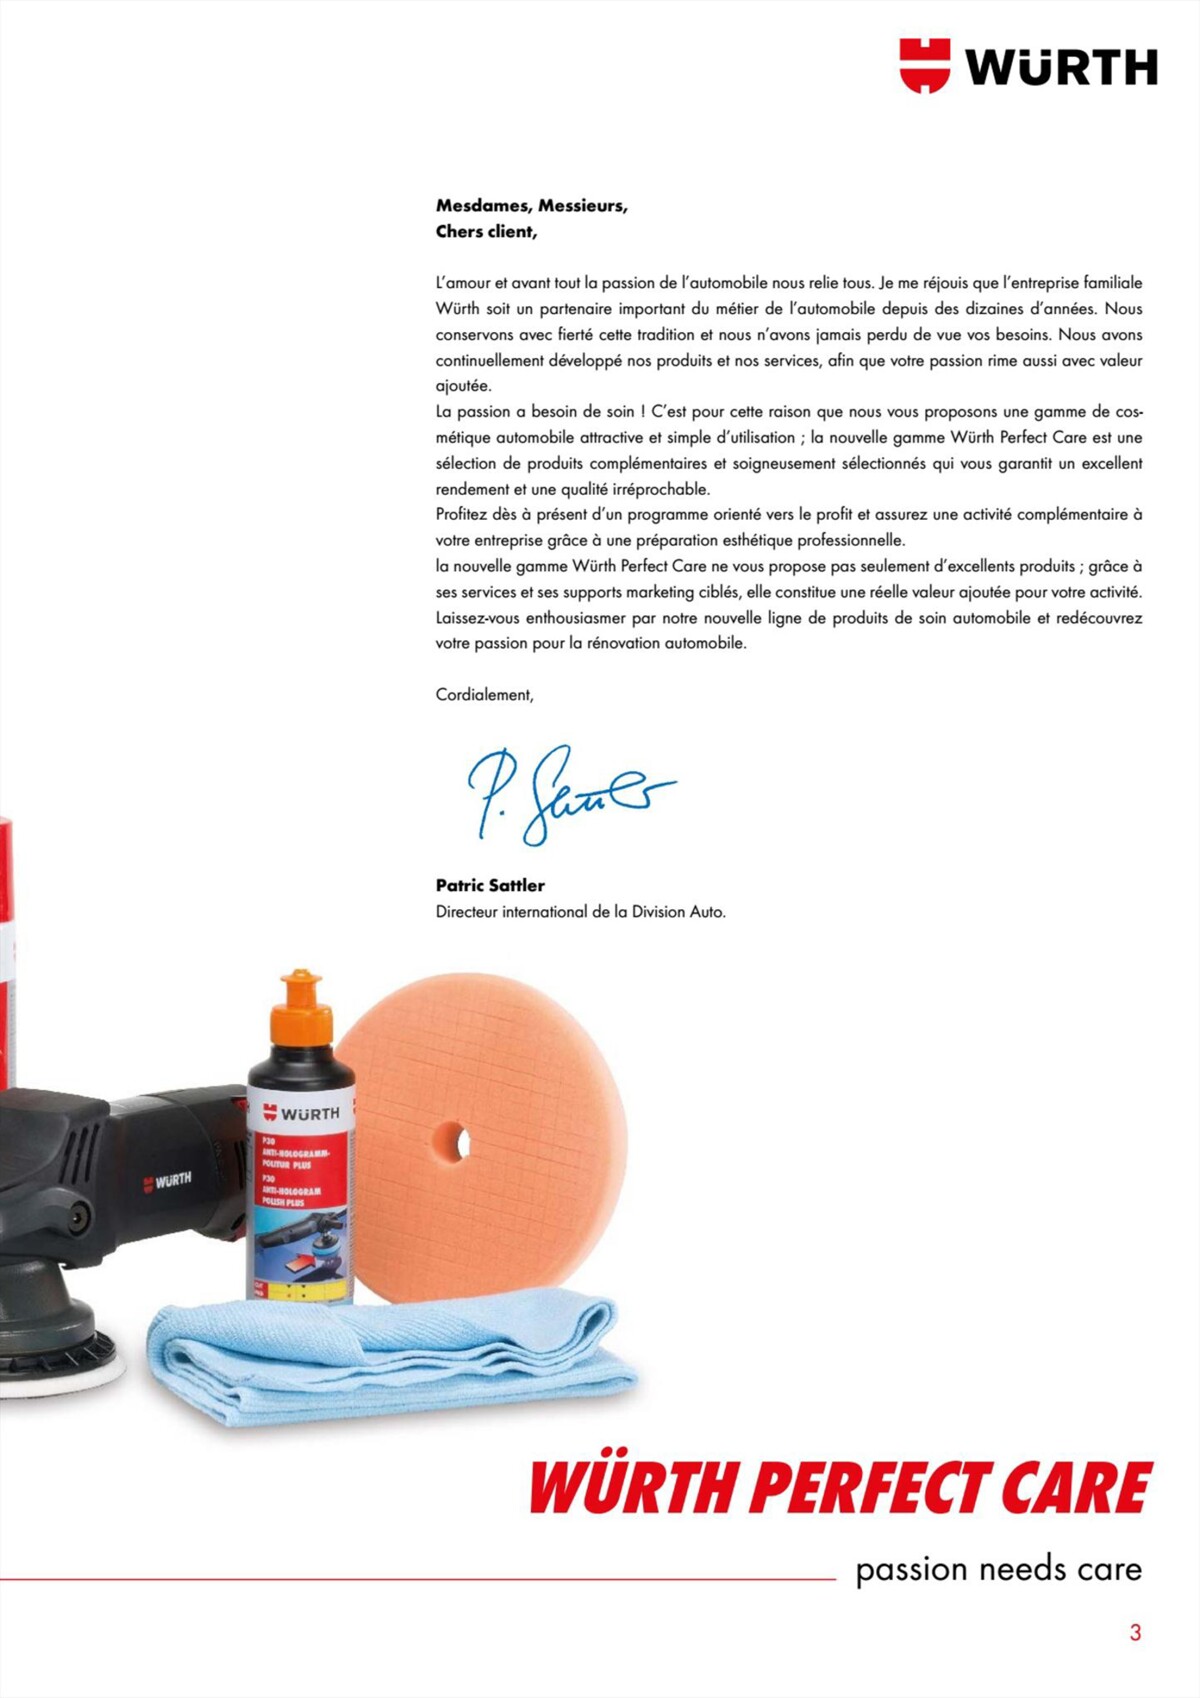 Catalogue Würth - Perfect Care, page 00003